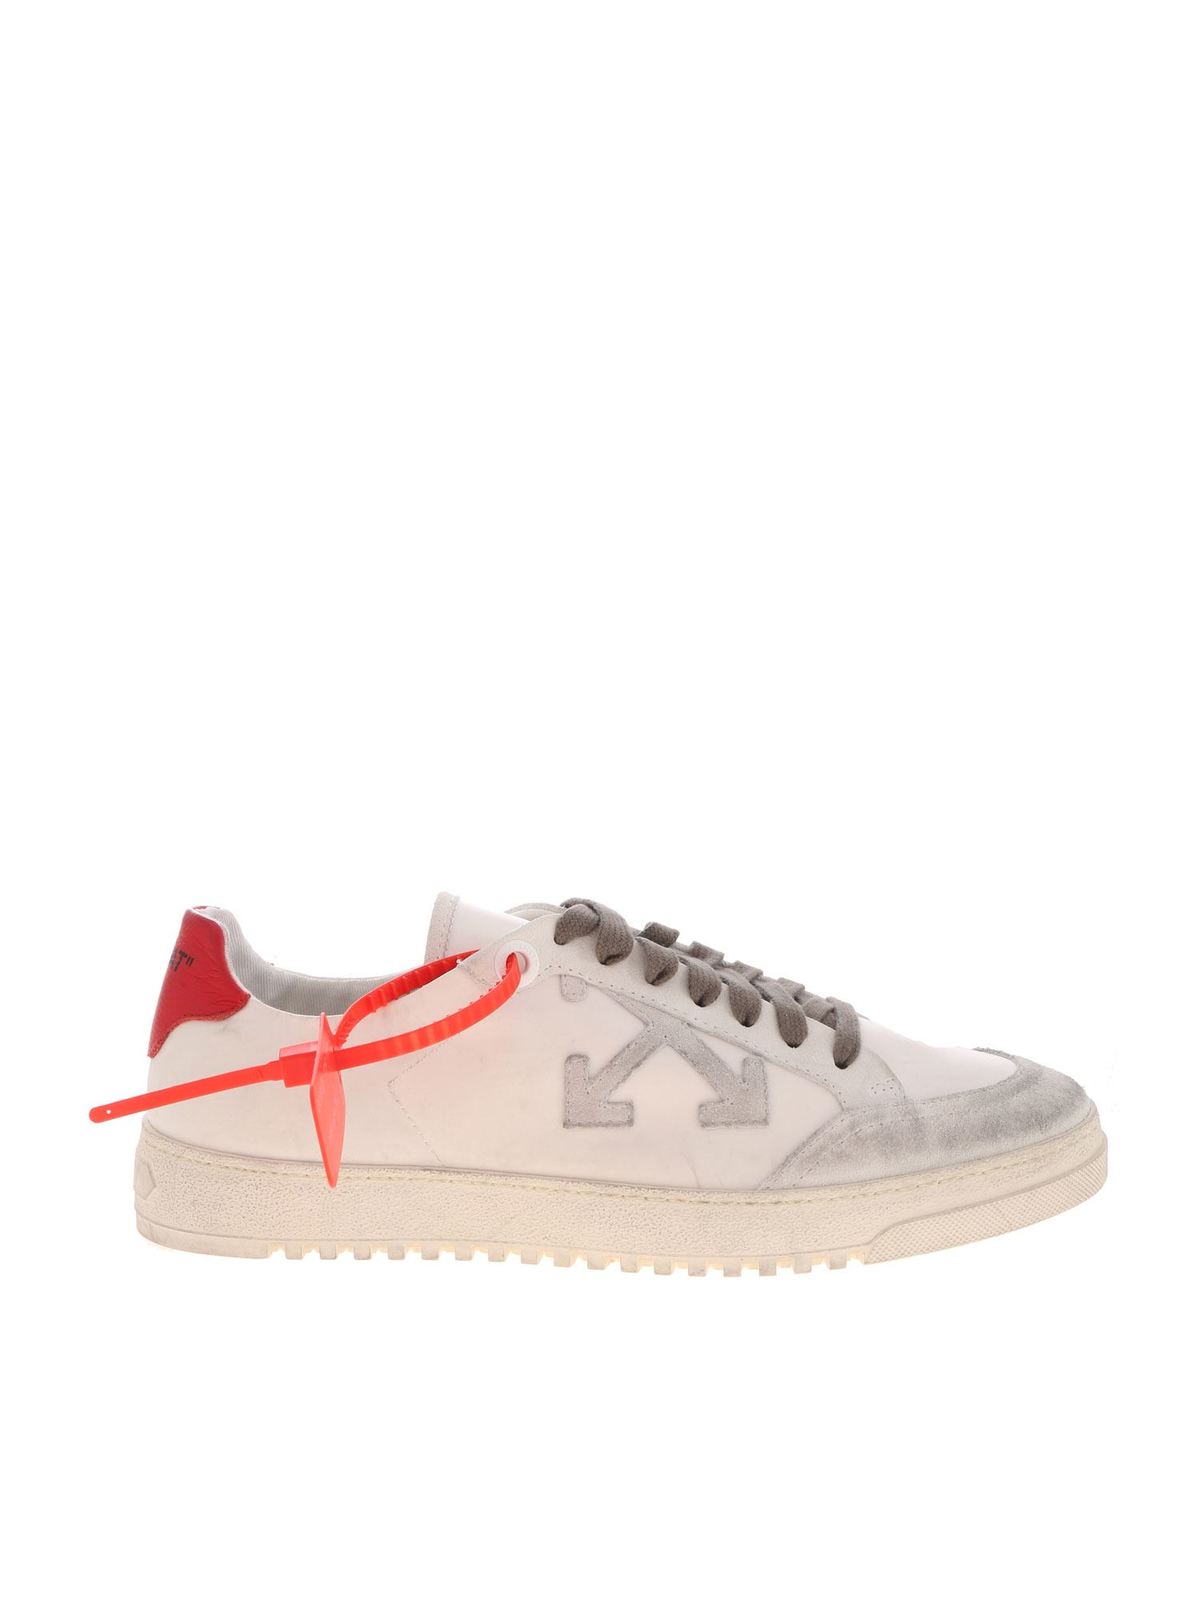 OFF-WHITE 20 trainers IN WHITE AND RED